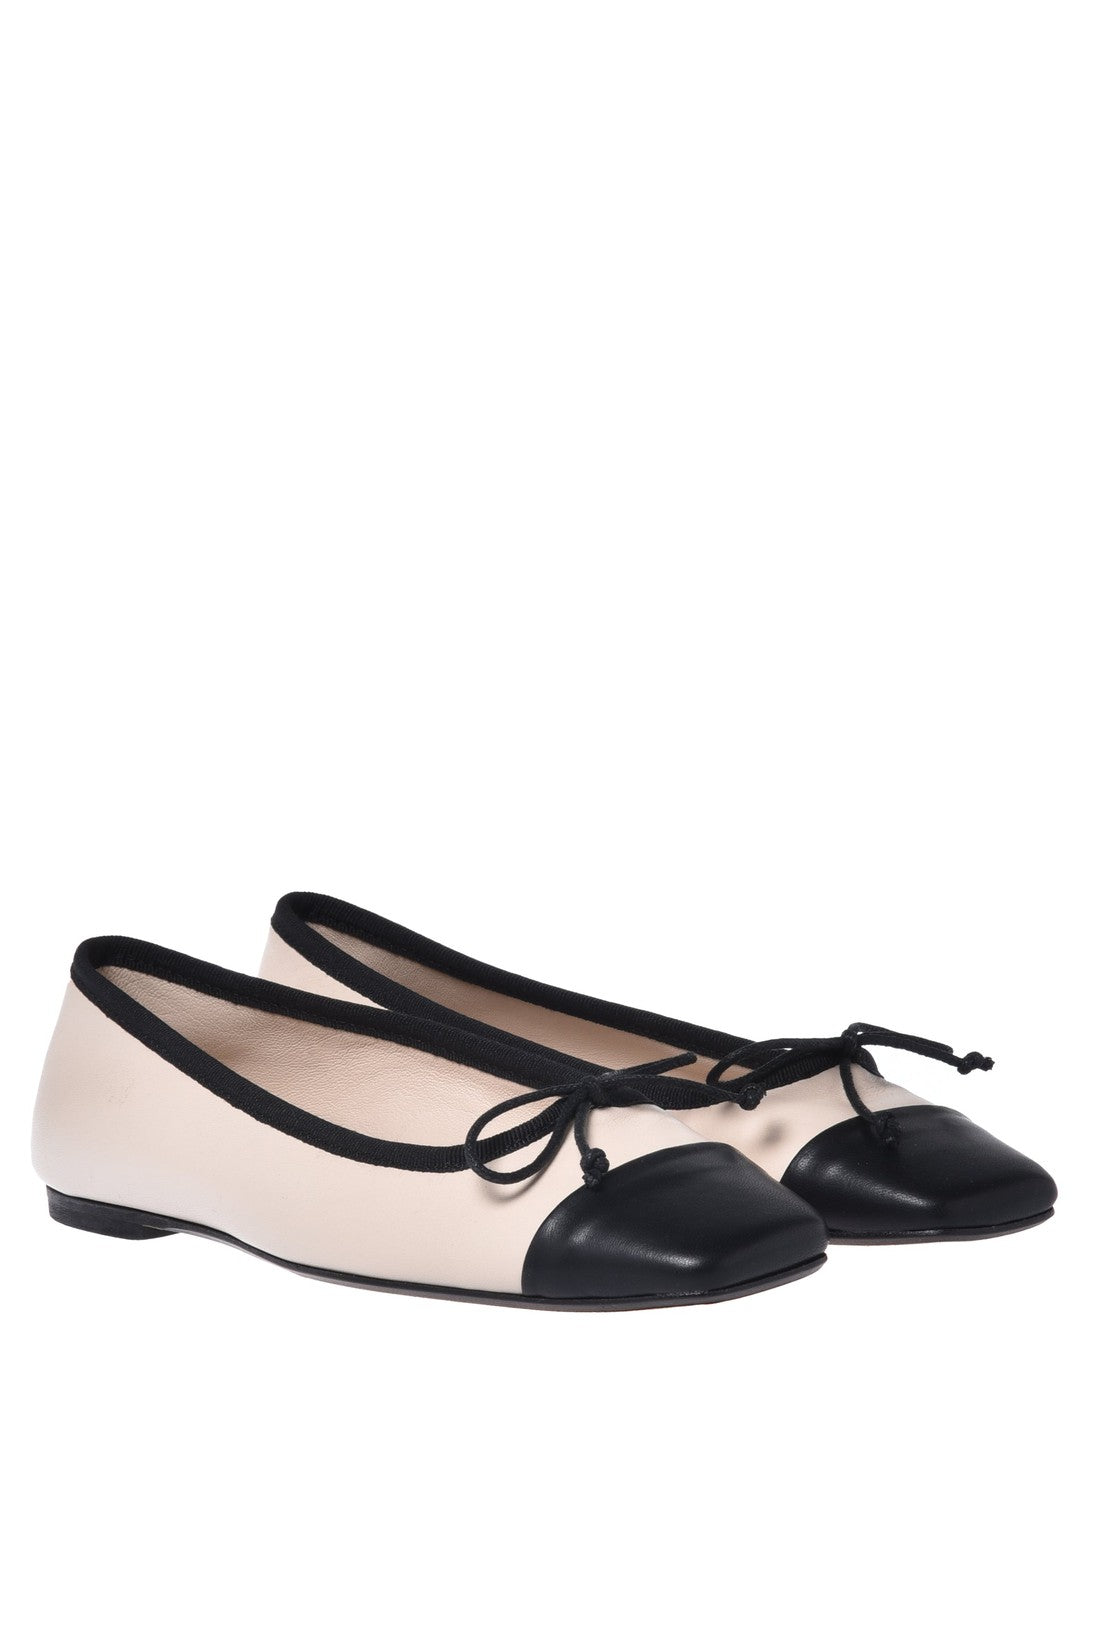 BALDININI-OUTLET-SALE-Ballerina-pump-in-black-and-beige-nappa-leather-Halbschuhe-ARCHIVE-COLLECTION-3.jpg